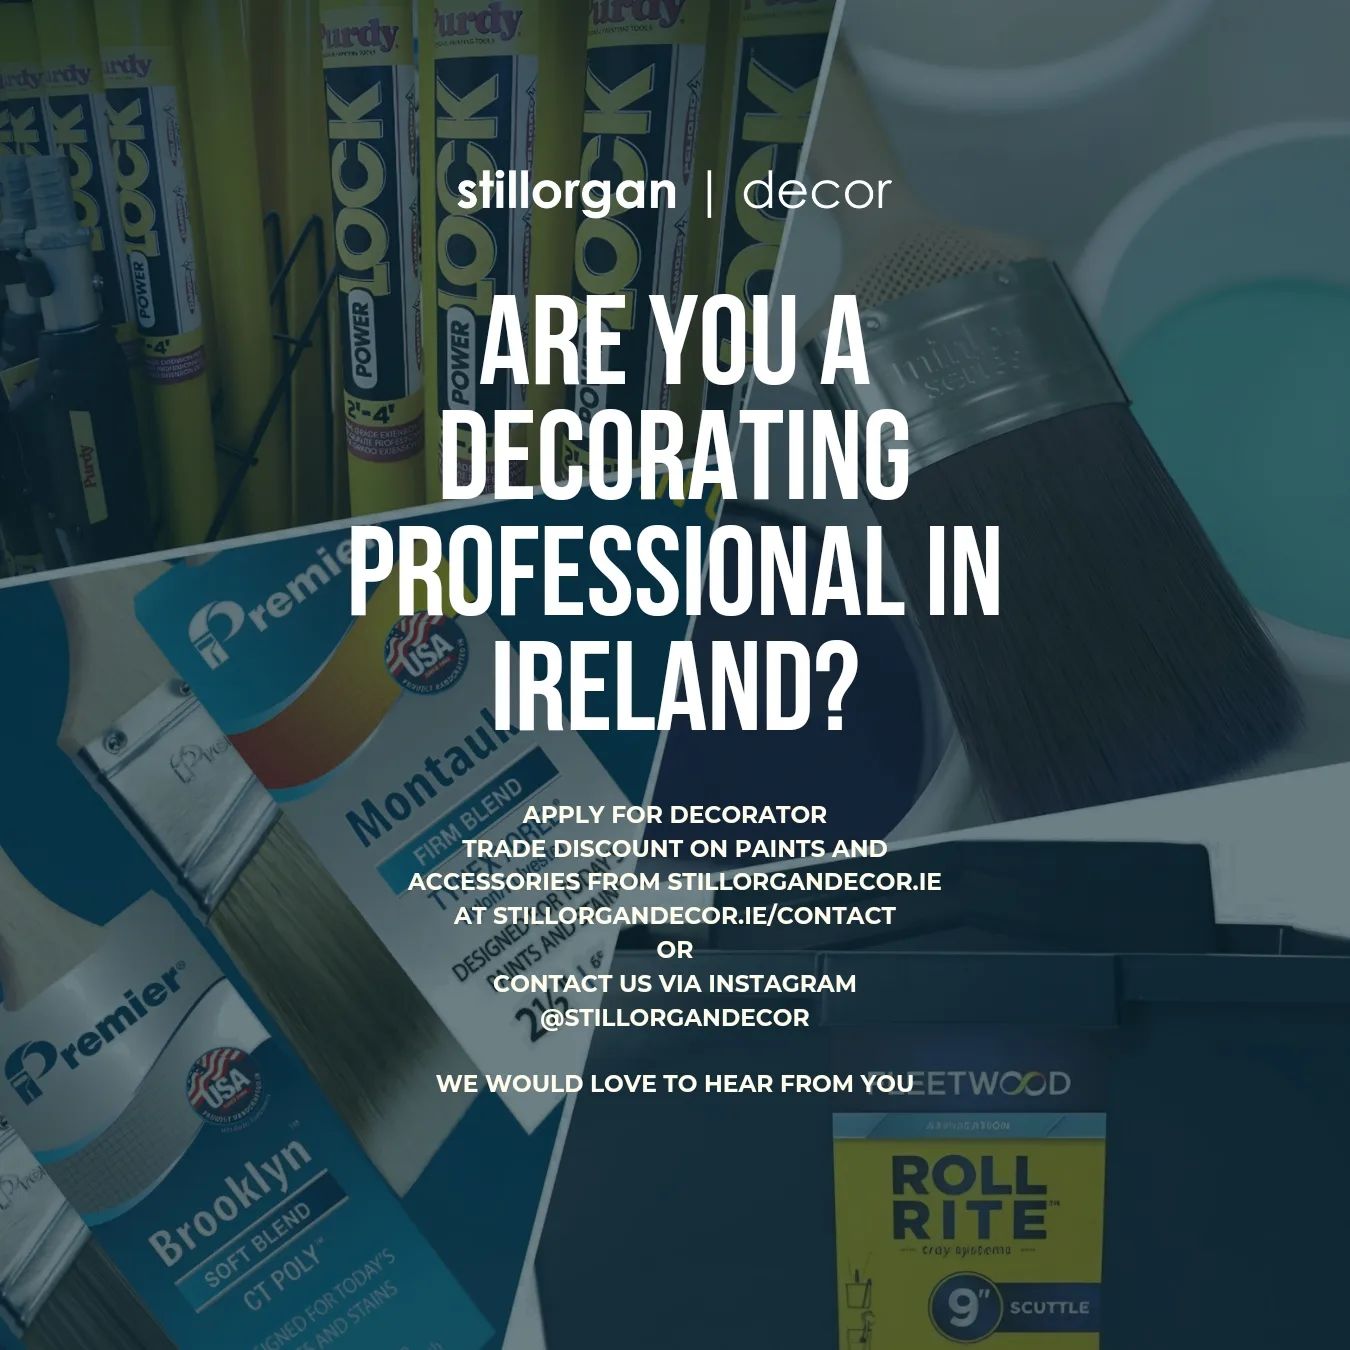 Decorating professional in Ireland? Apply for trade discount on paints and accessories at stillorgandecor.ie !

Get in touch by direct messaging us on Instagram or via our website at stillorgandecor.ie/contact - we would love to hear from you.